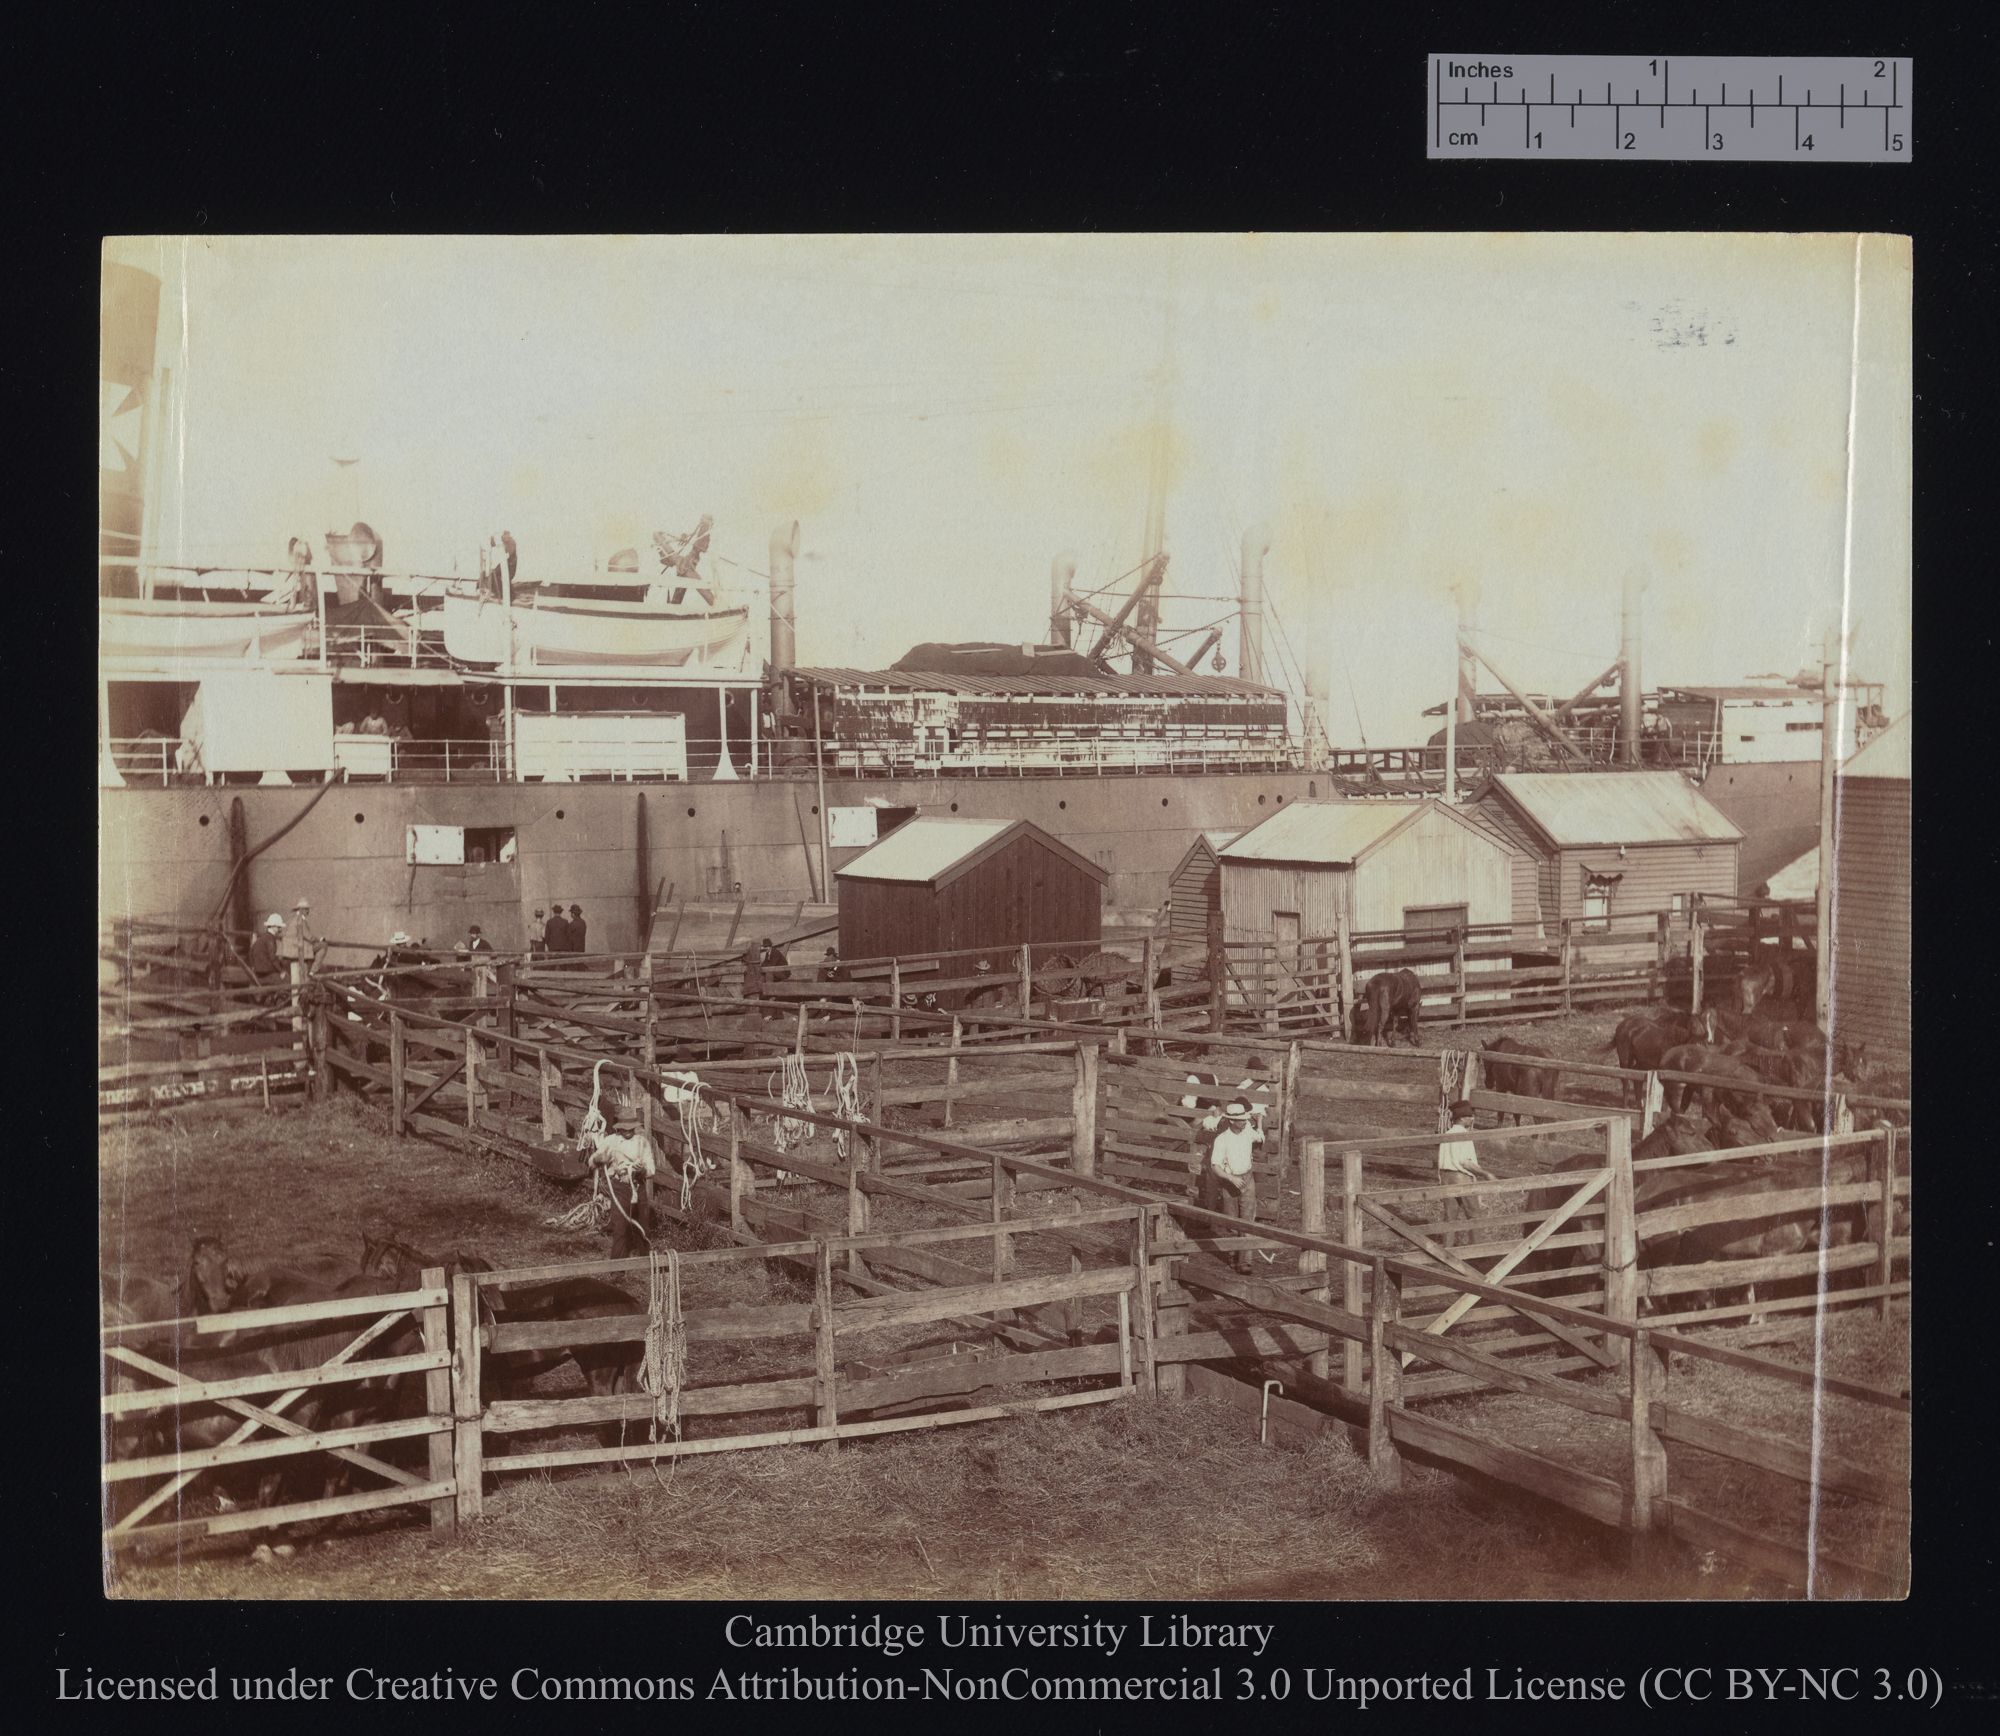 [Horse corrals on shore, with unidentified ship in the background], 1899 - 1901